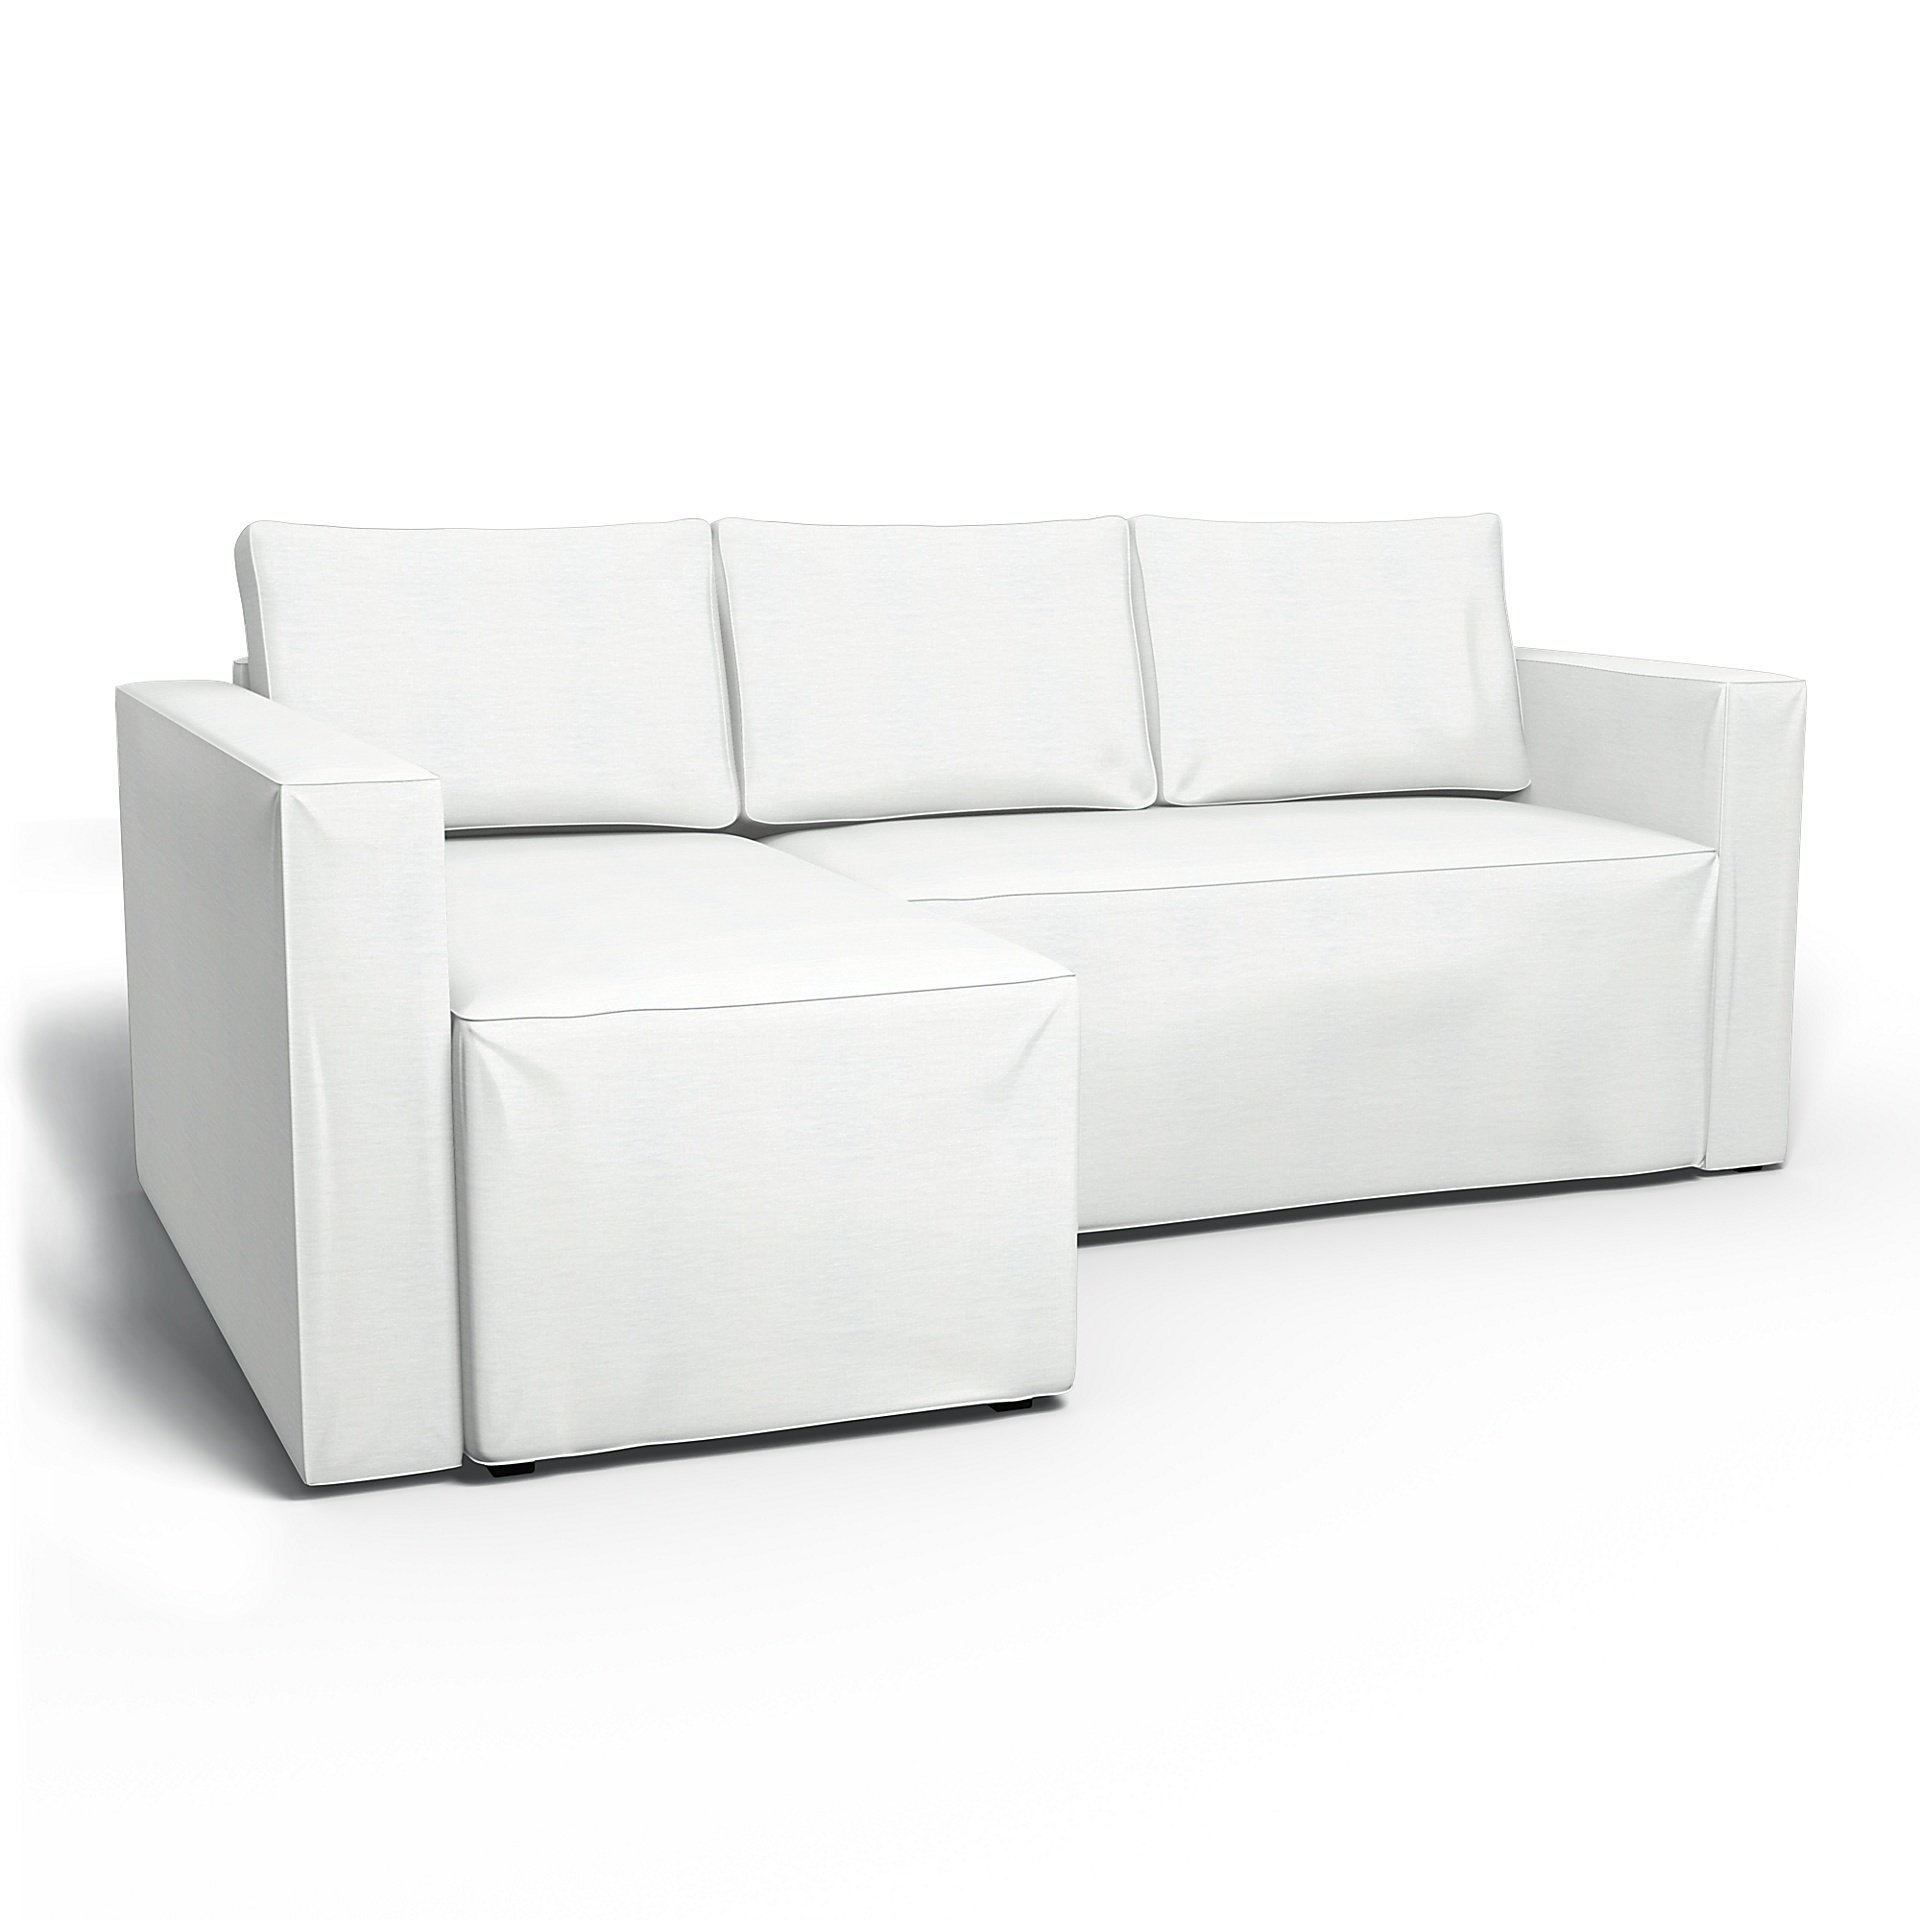 IKEA - Manstad Sofa Bed with Left Chaise Cover, White, Linen - Bemz